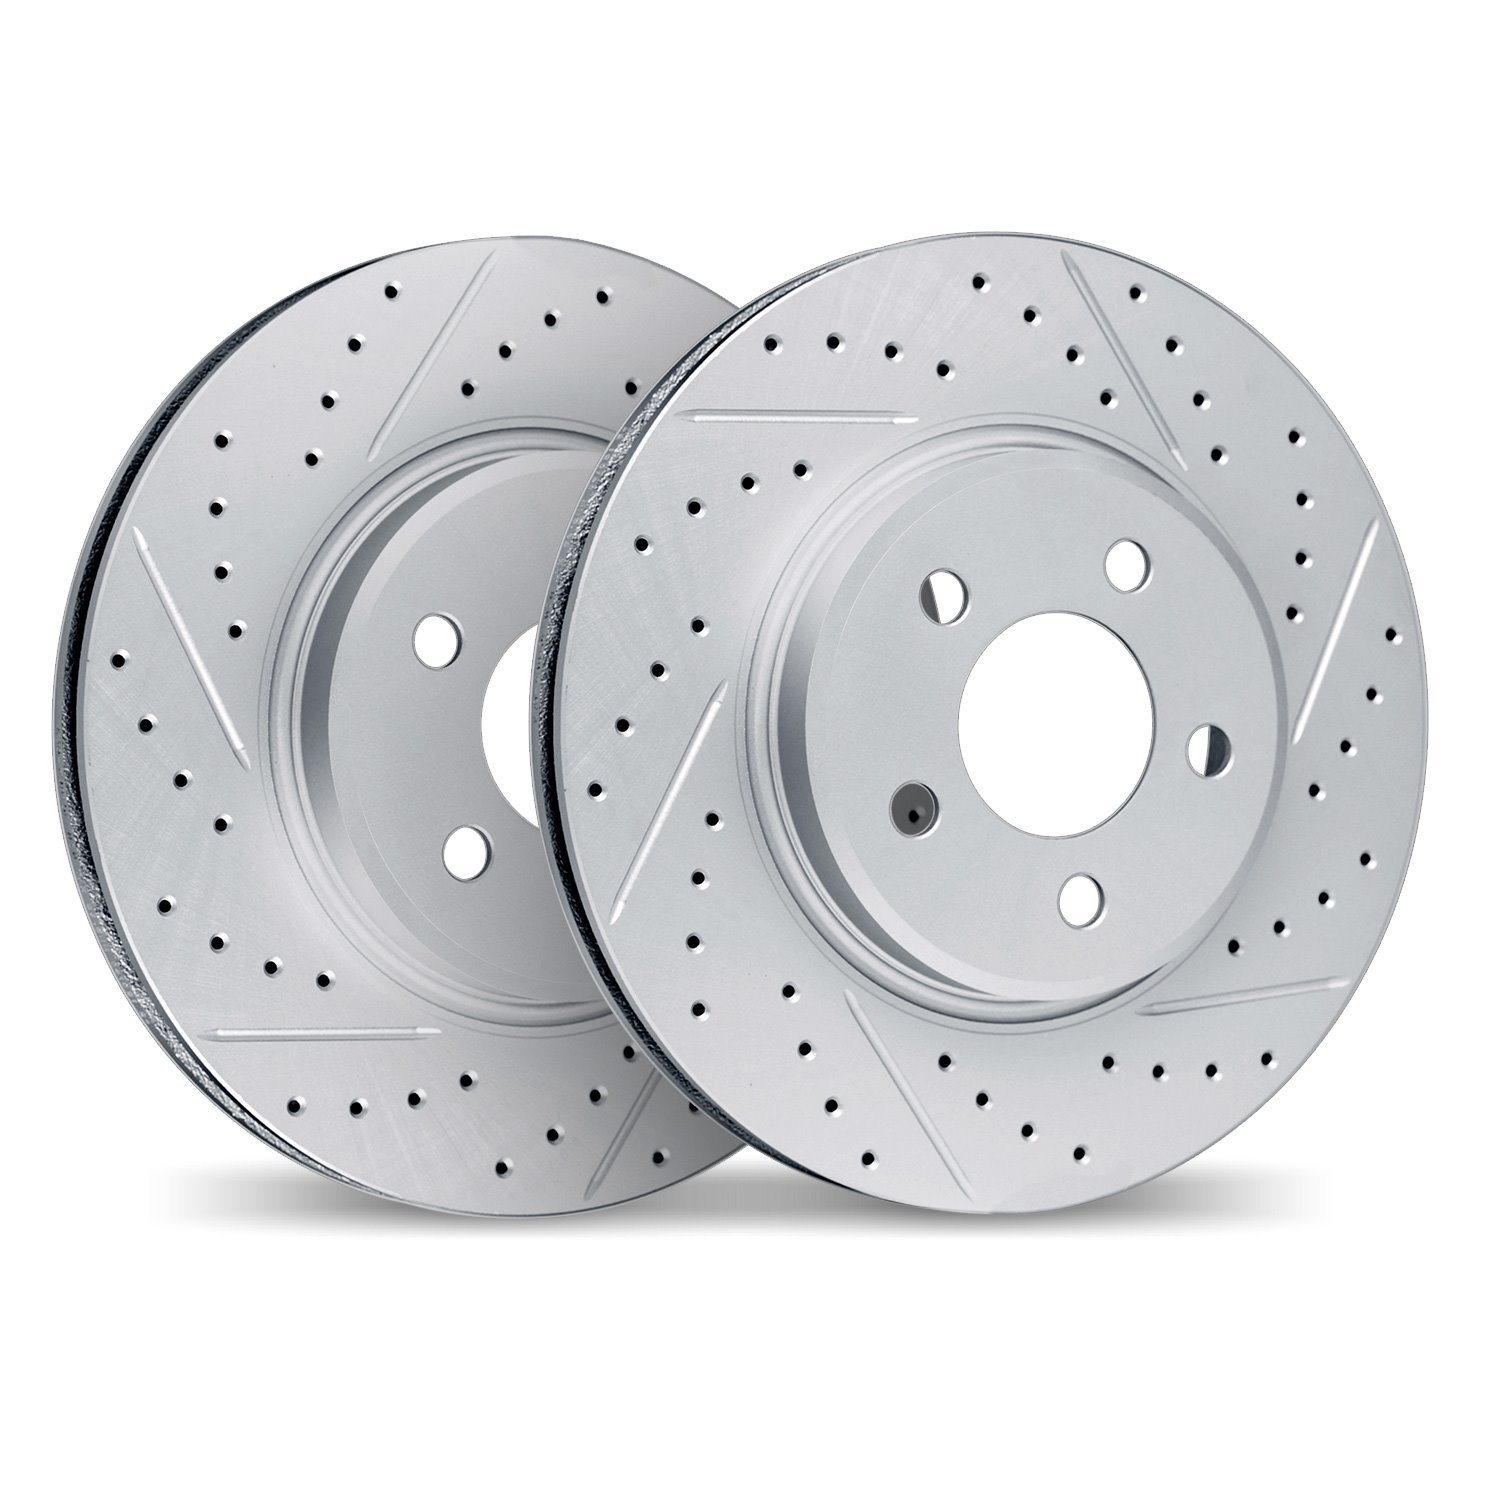 2002-80042 Geoperformance Drilled/Slotted Brake Rotors, 2007-2015 Ford/Lincoln/Mercury/Mazda, Position: Rear